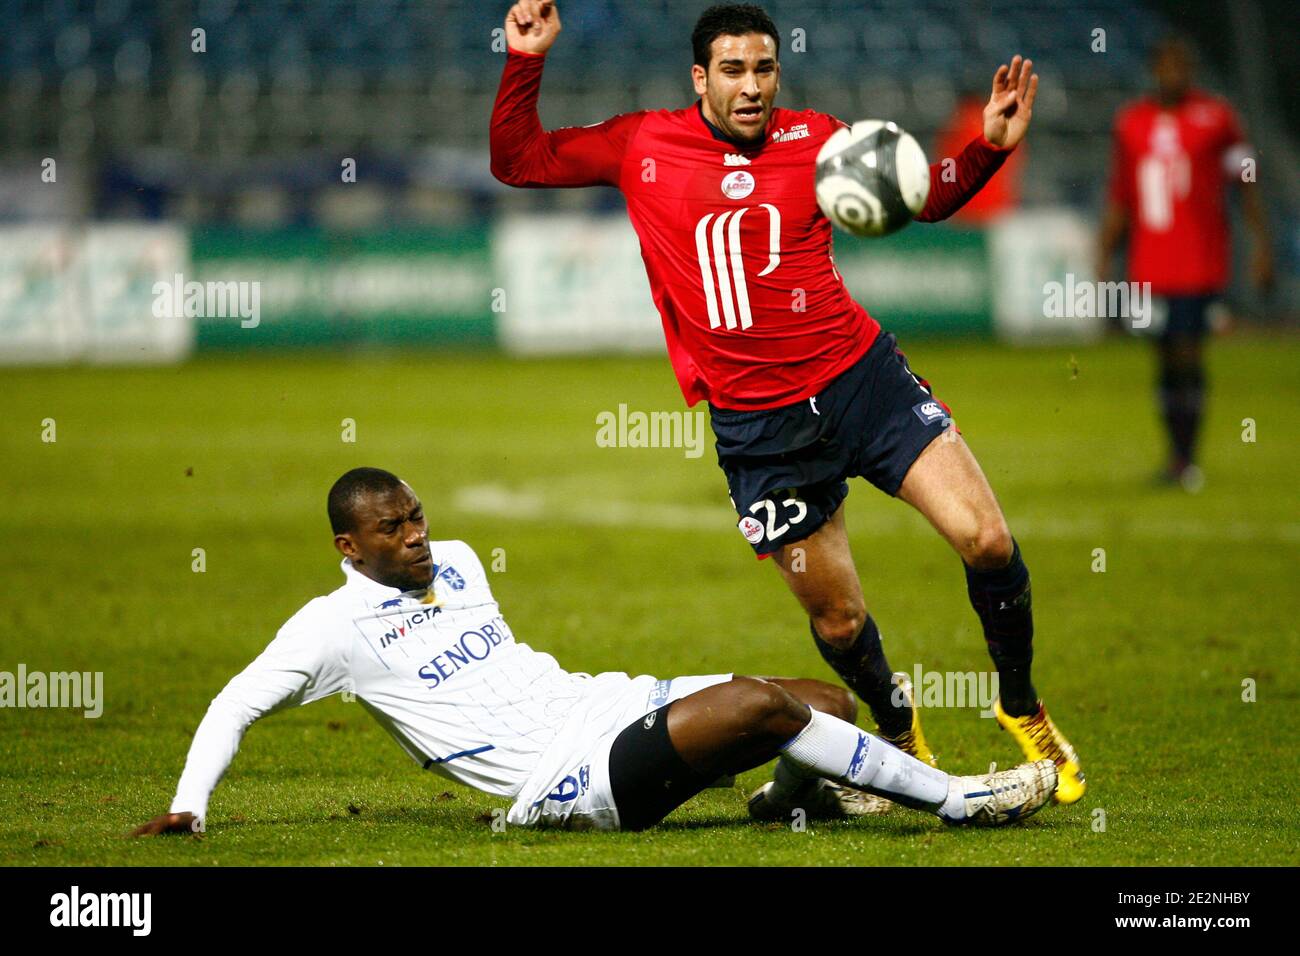 Lille's Adil Rami fights for the ball with Auxerre's Adama Coulibaly during  French First League soccer match, Lille vs AJ Auxerre at Stadium Lille  Metropole in Lille, France on Febuary 28, 2010.